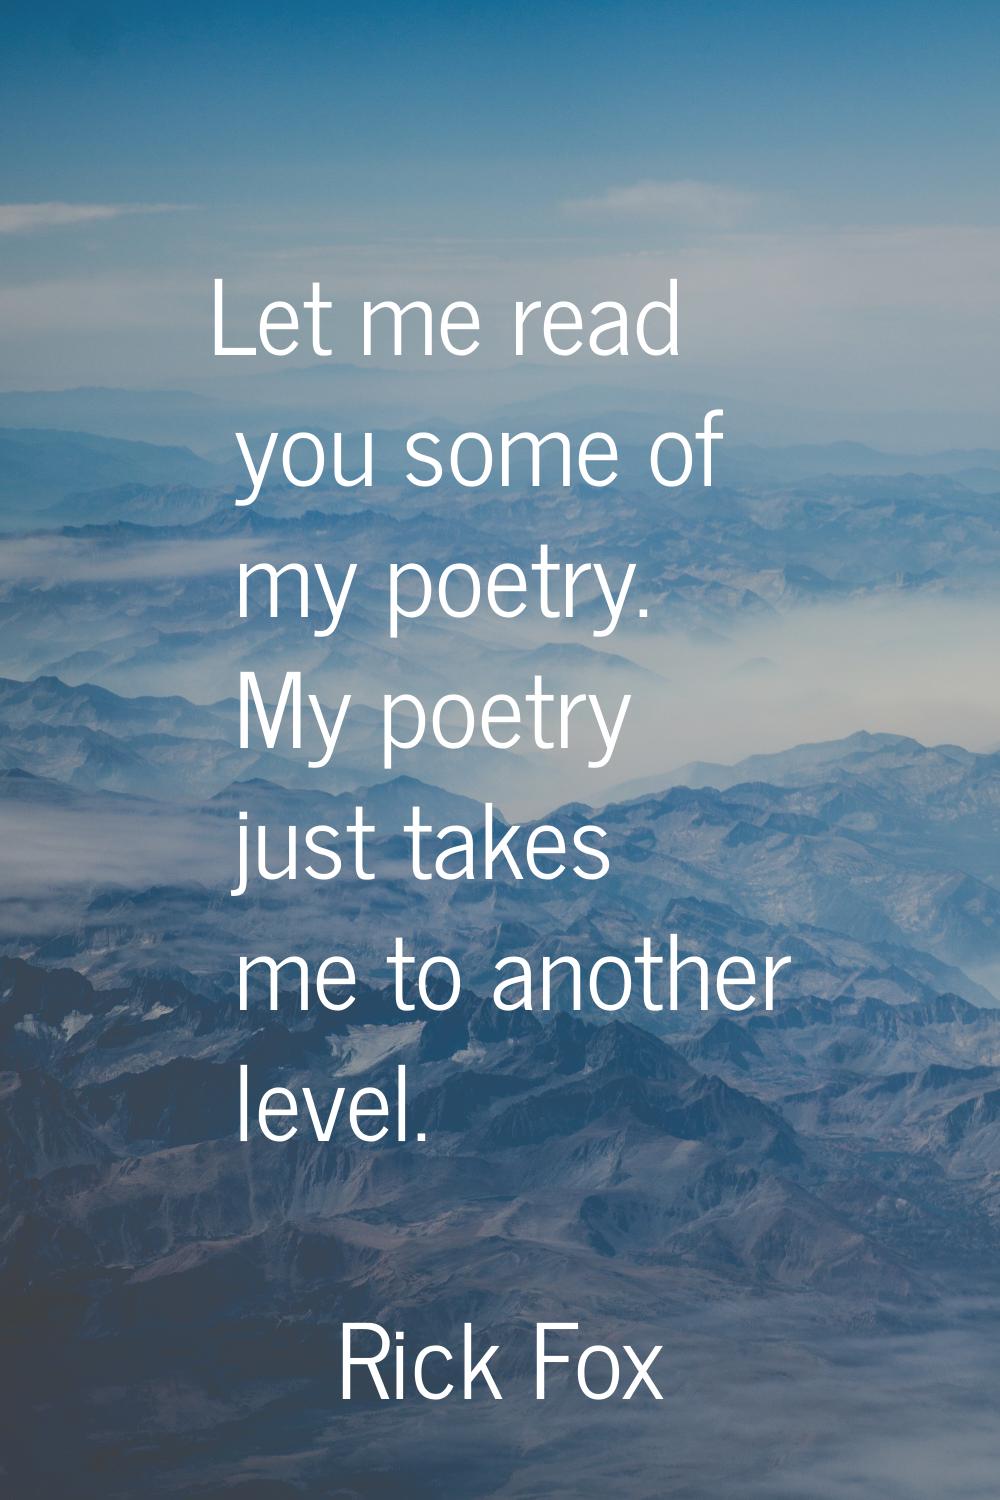 Let me read you some of my poetry. My poetry just takes me to another level.